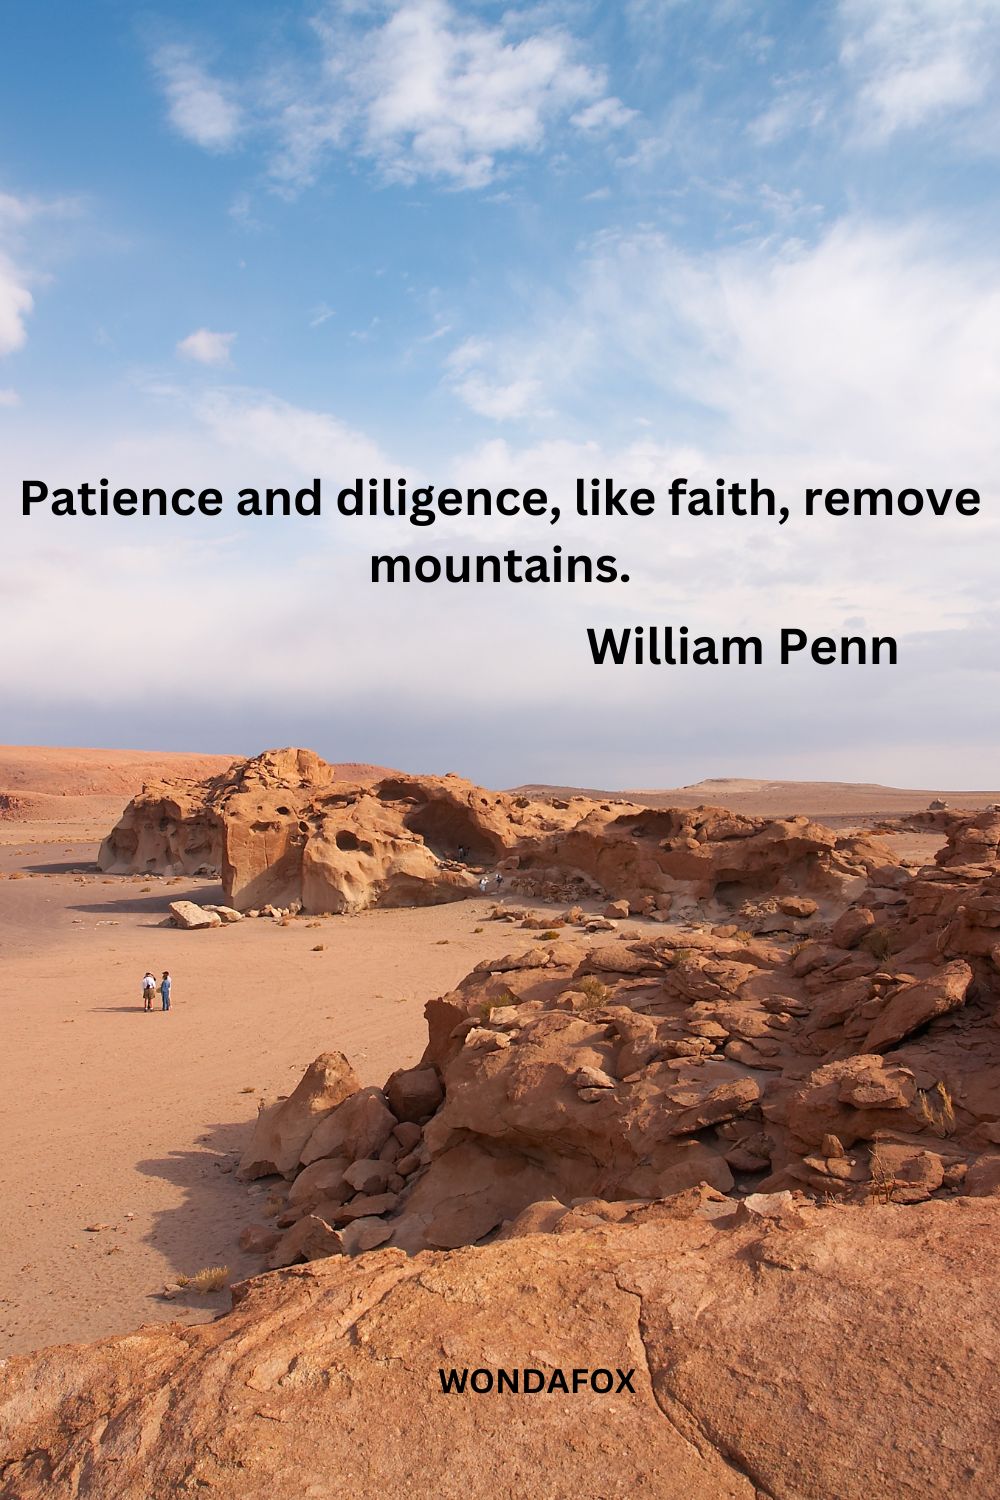 Patience and diligence, like faith, remove mountains.
William Penn